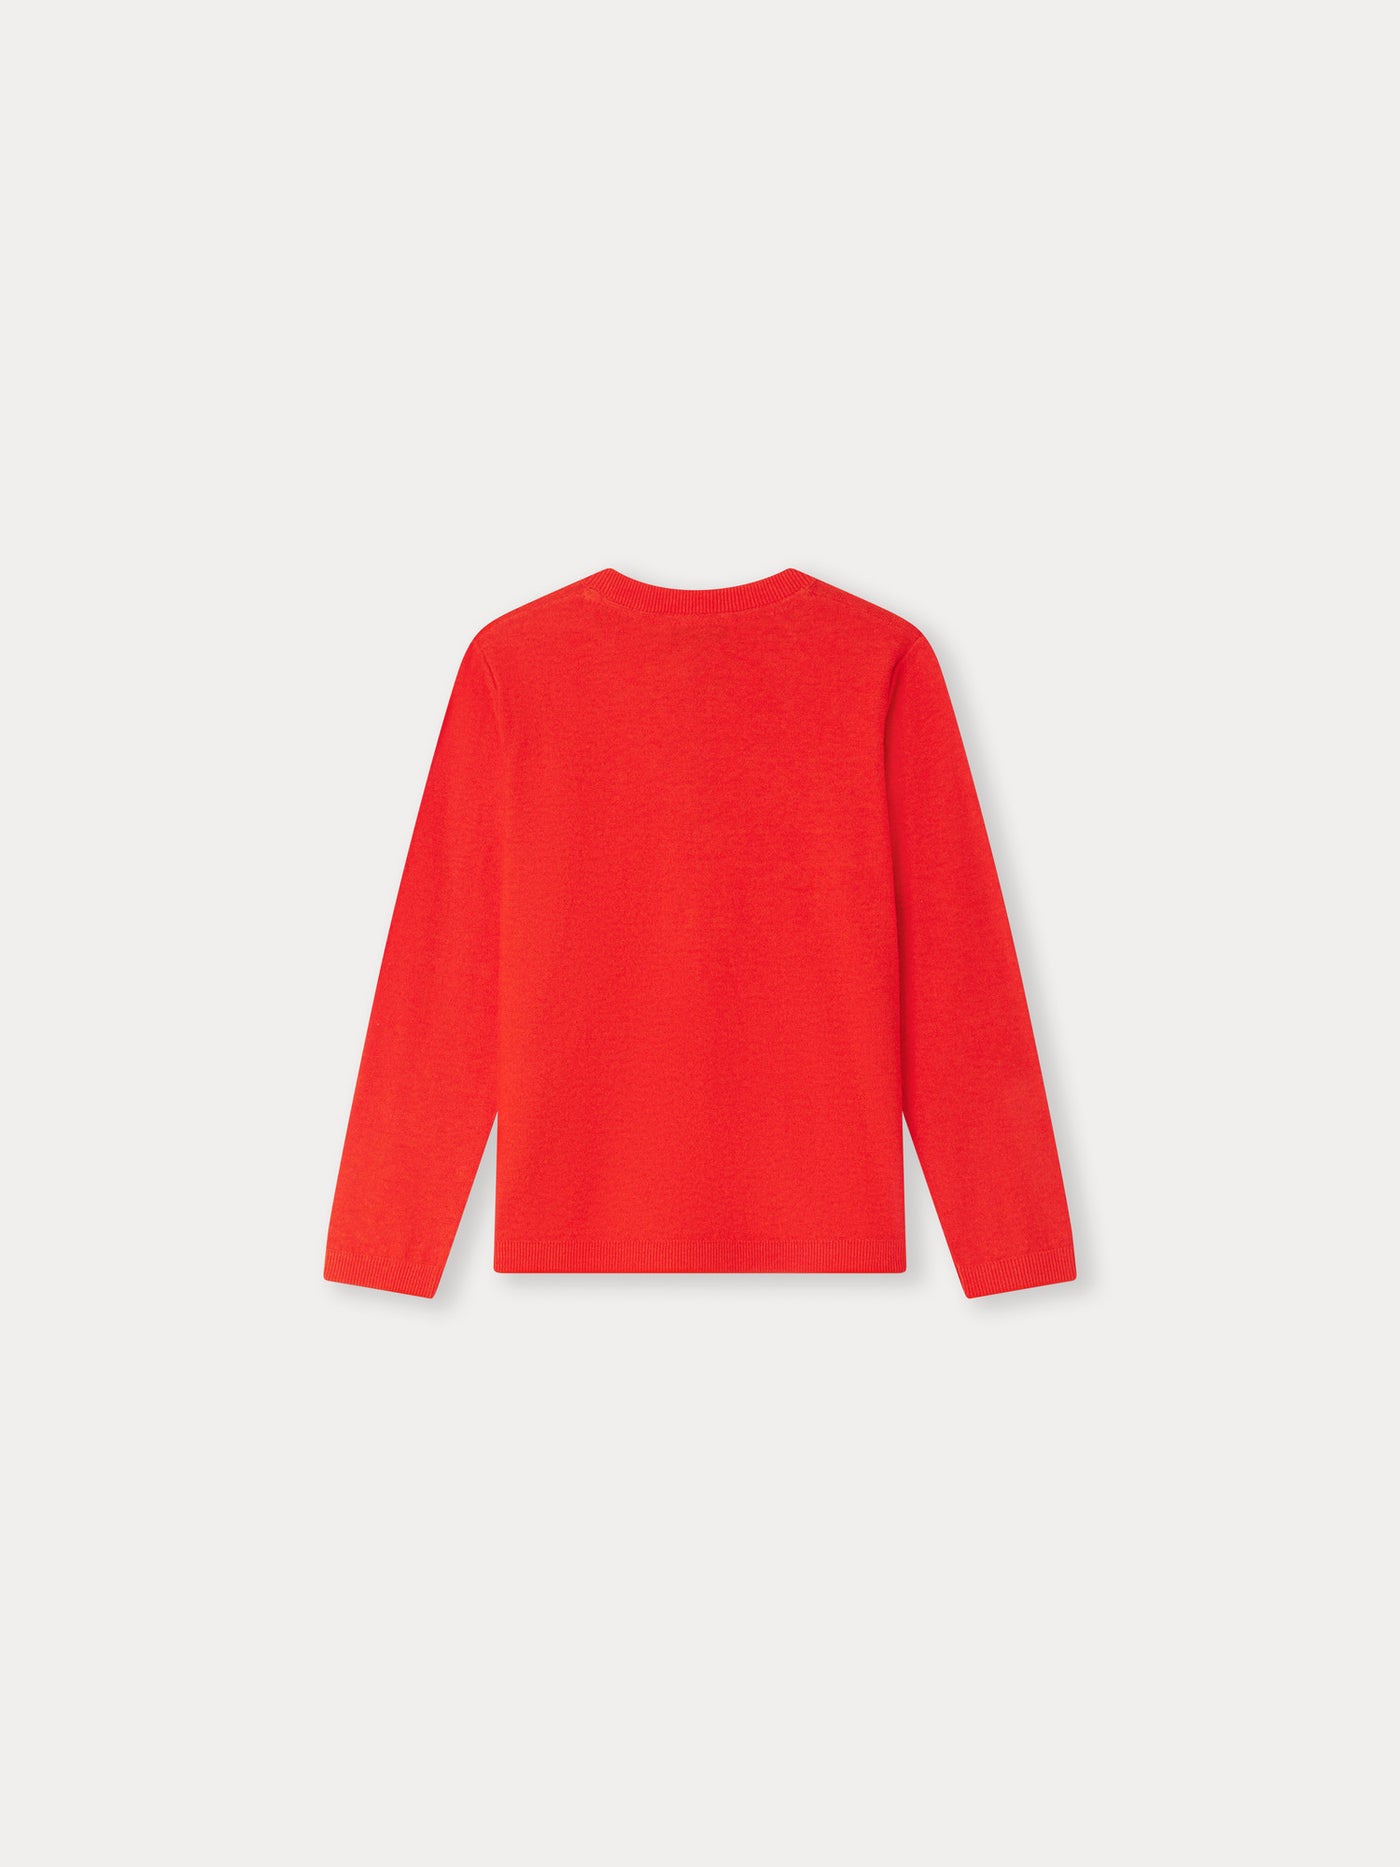 Channing Sweater poppy red